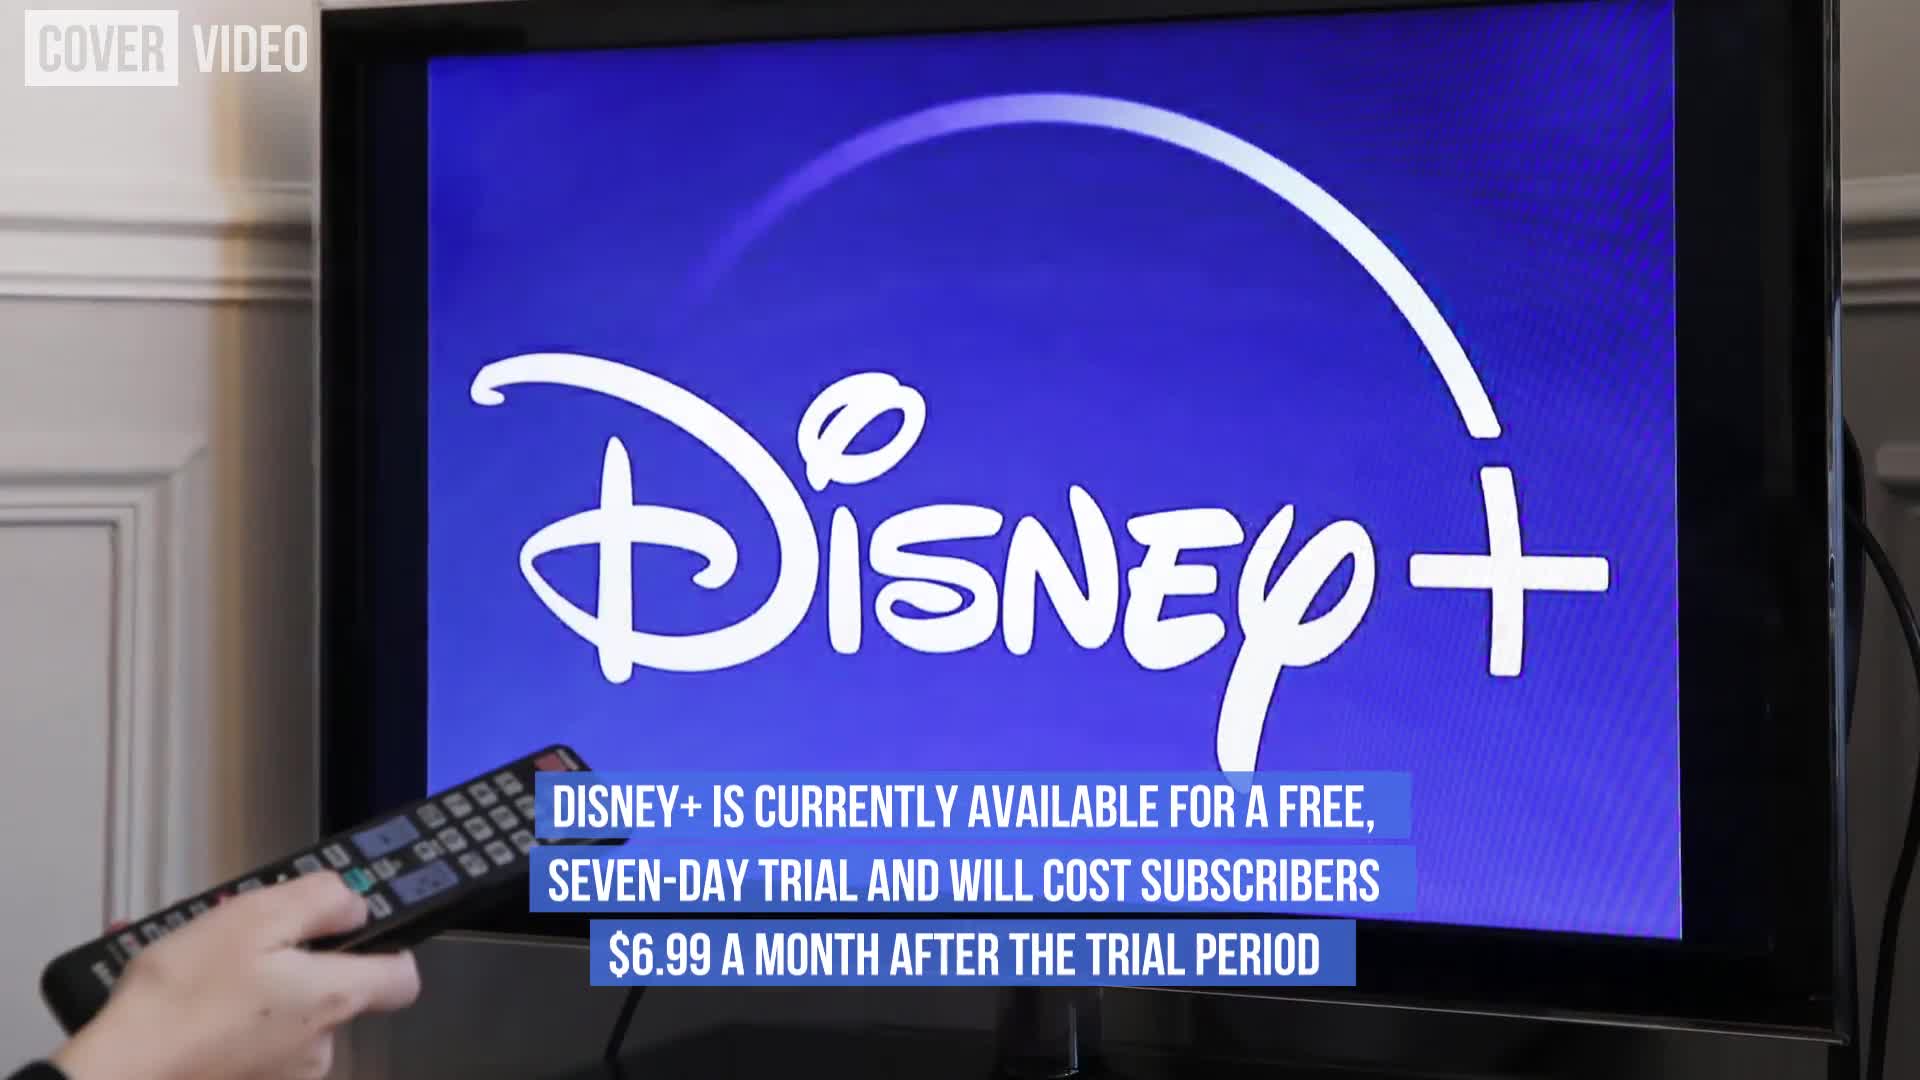 Disney+ App Downloaded 3.2 Million Times on First Day Available